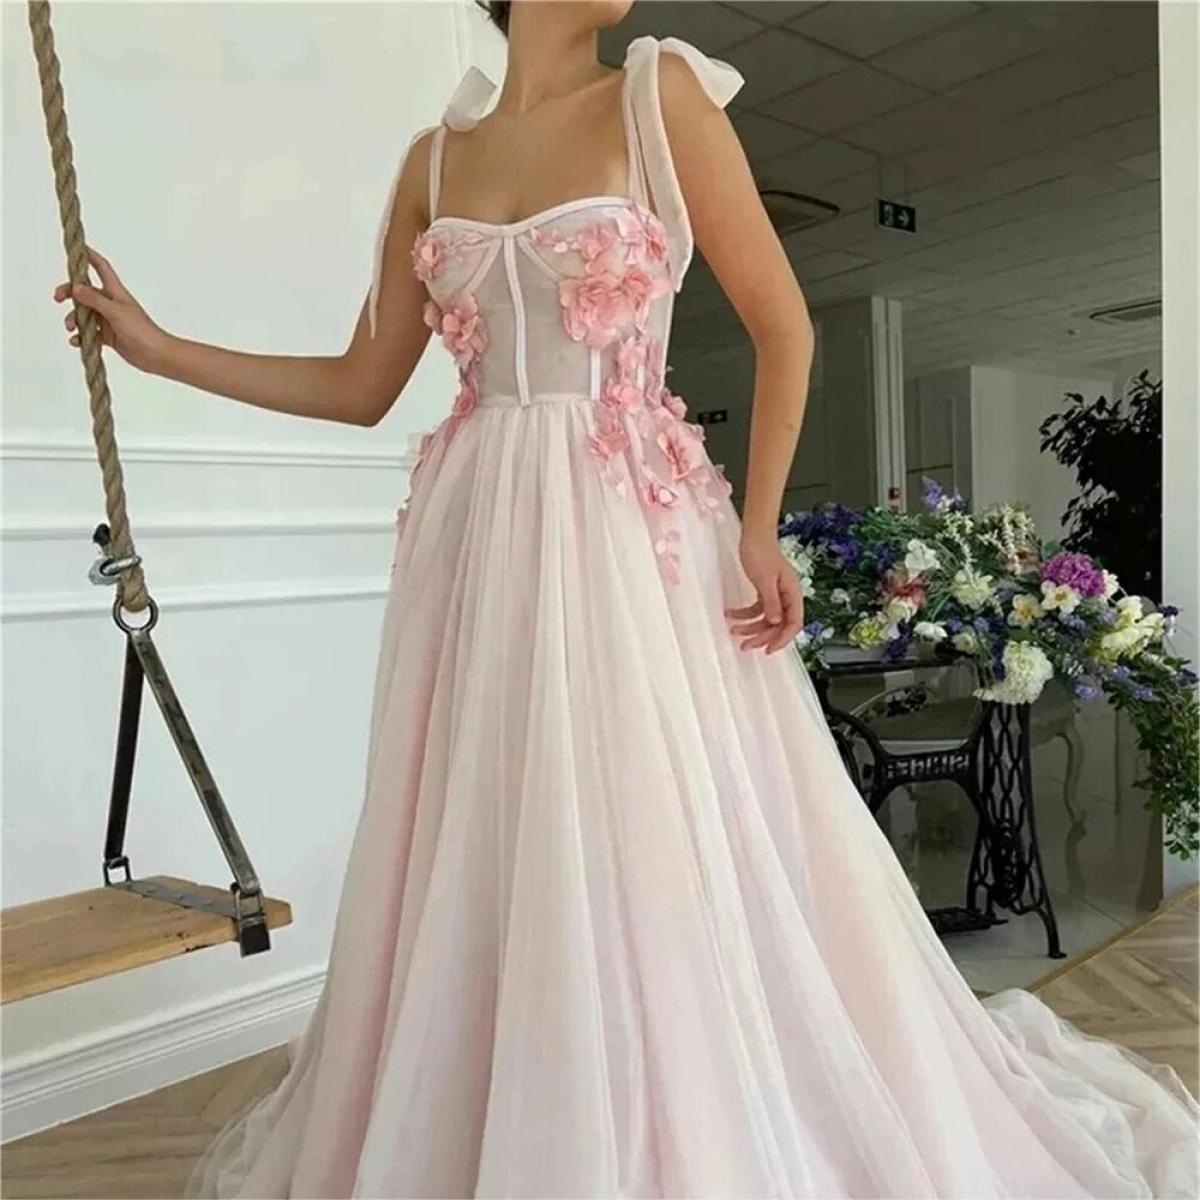 Princess Sweetheart Tulle Prom Dress A Line Fairy Pink Floral Prom Dress Cocktail Party Birthday Dress For Women Spaghet